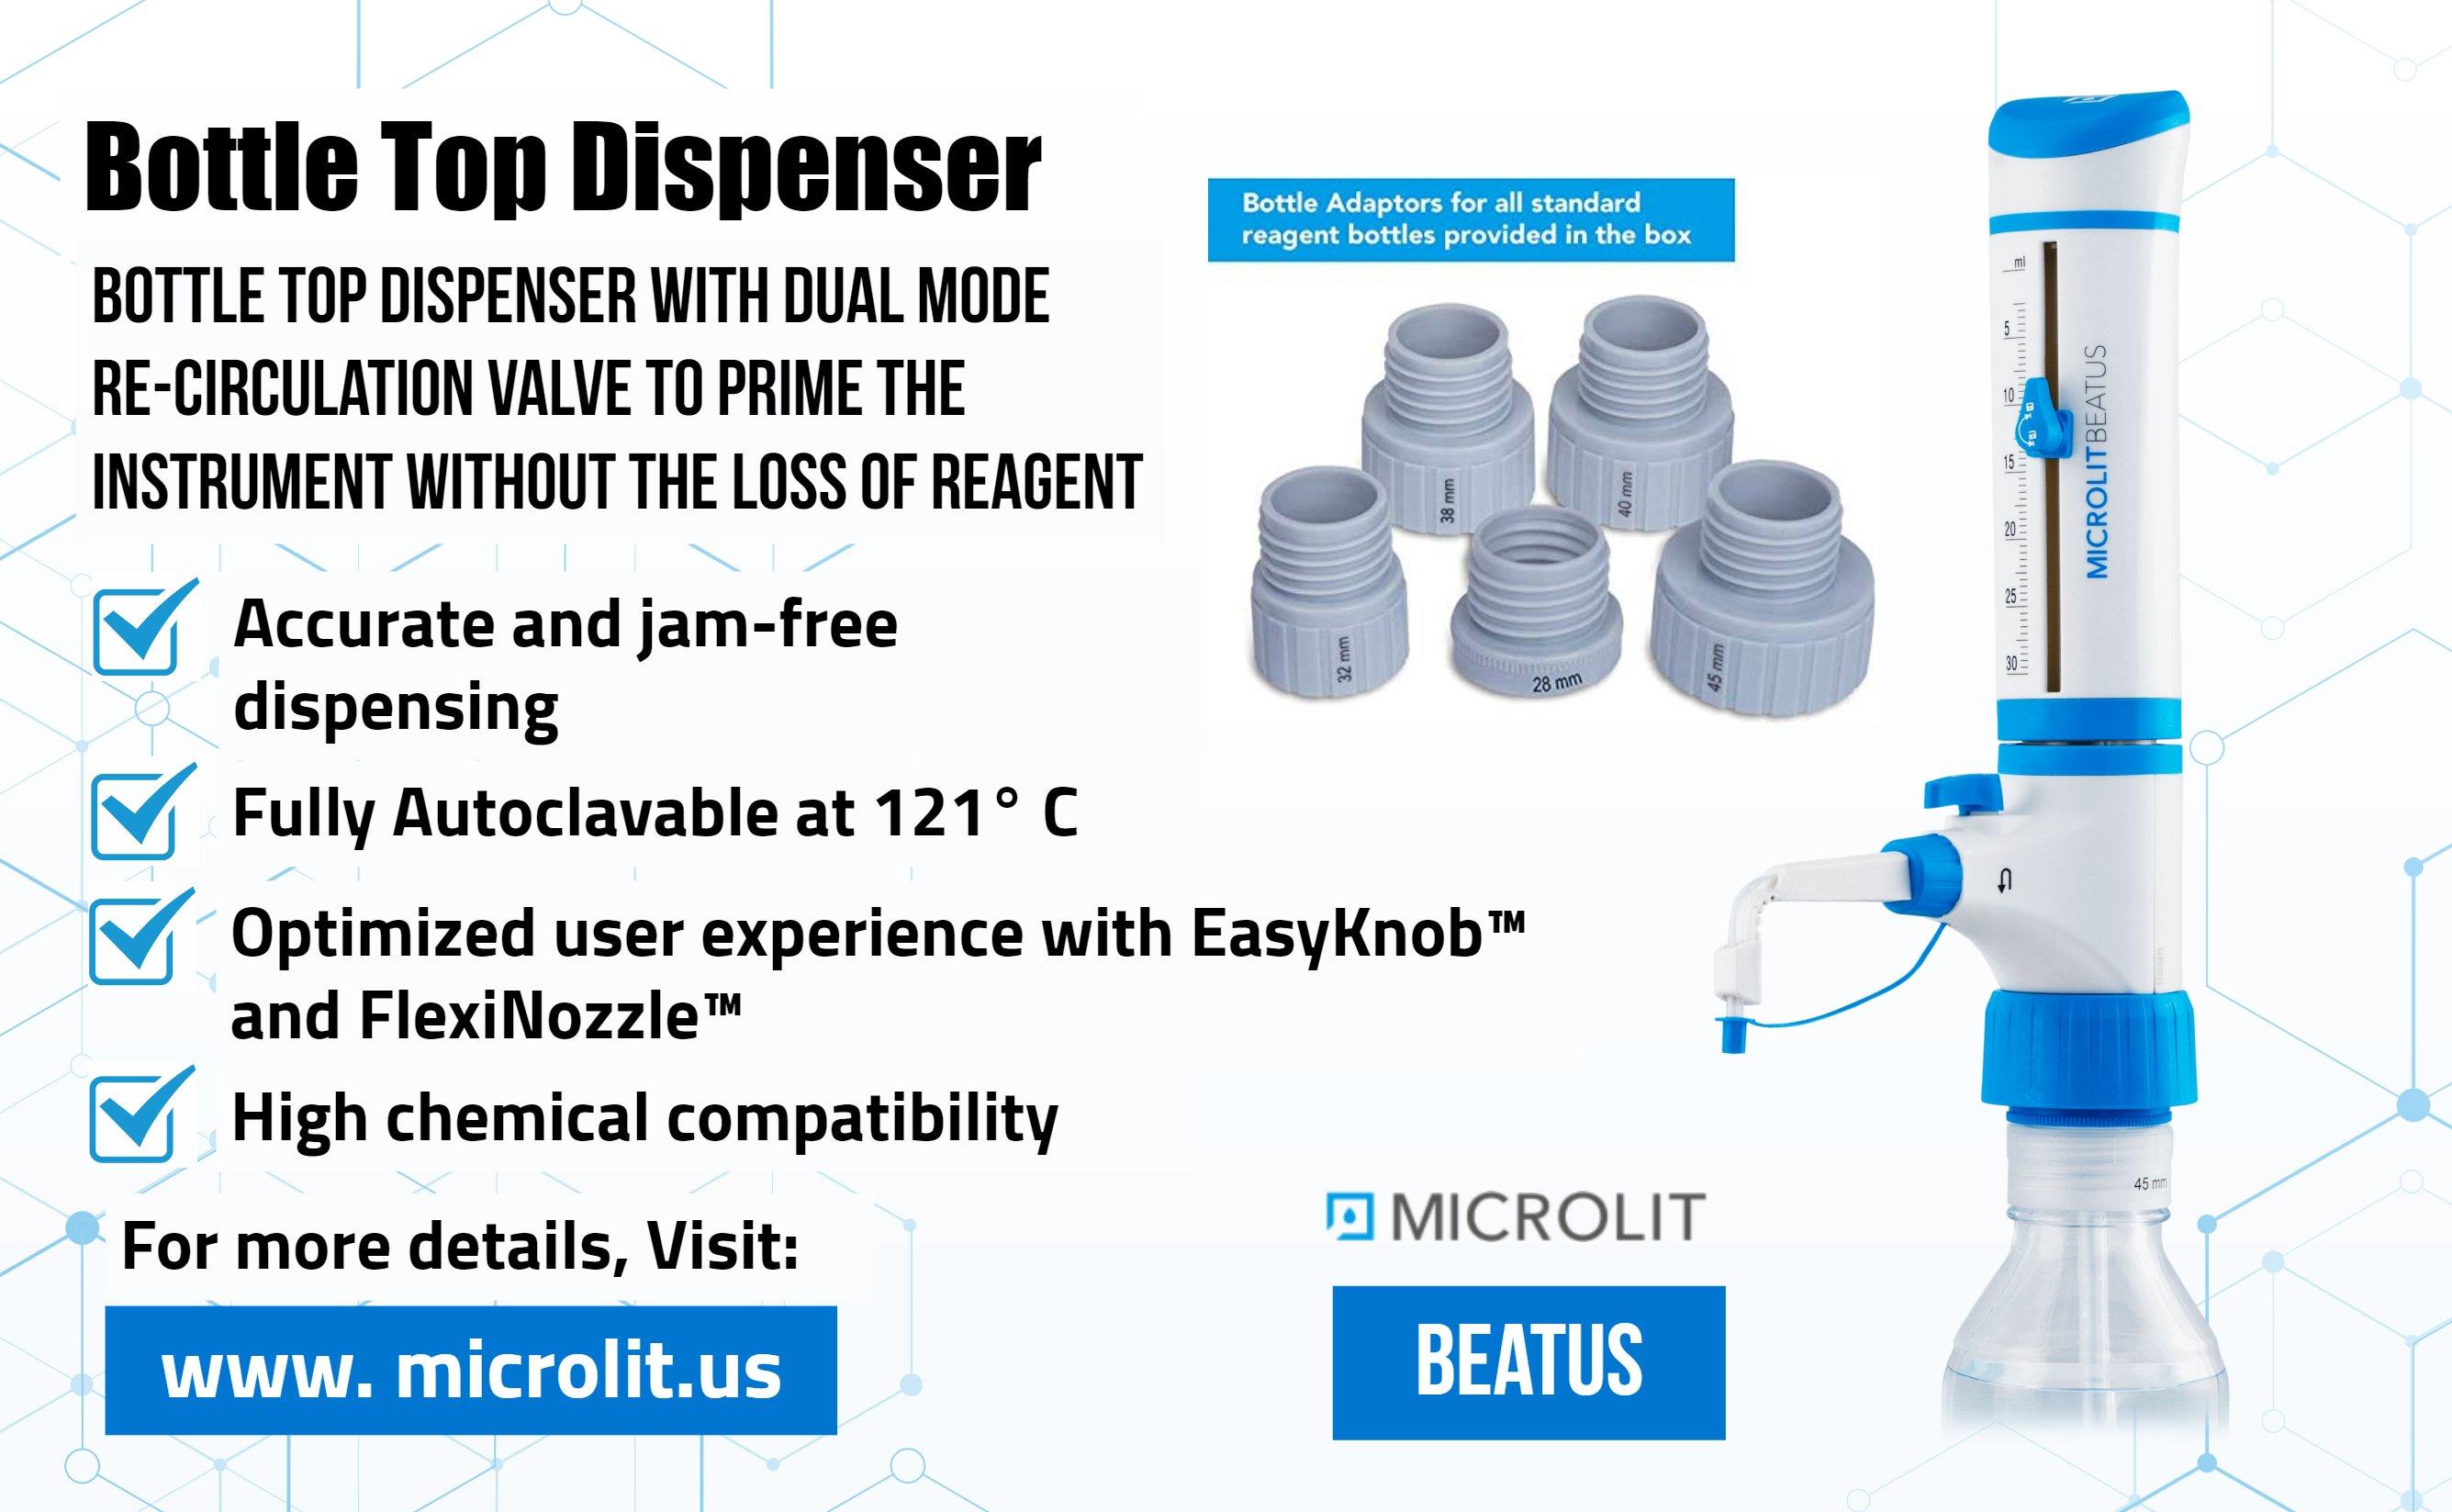 Image - Microlit offers the world class #BottleTopDispenser with dual re-circulation valve to prime the instrument wi...